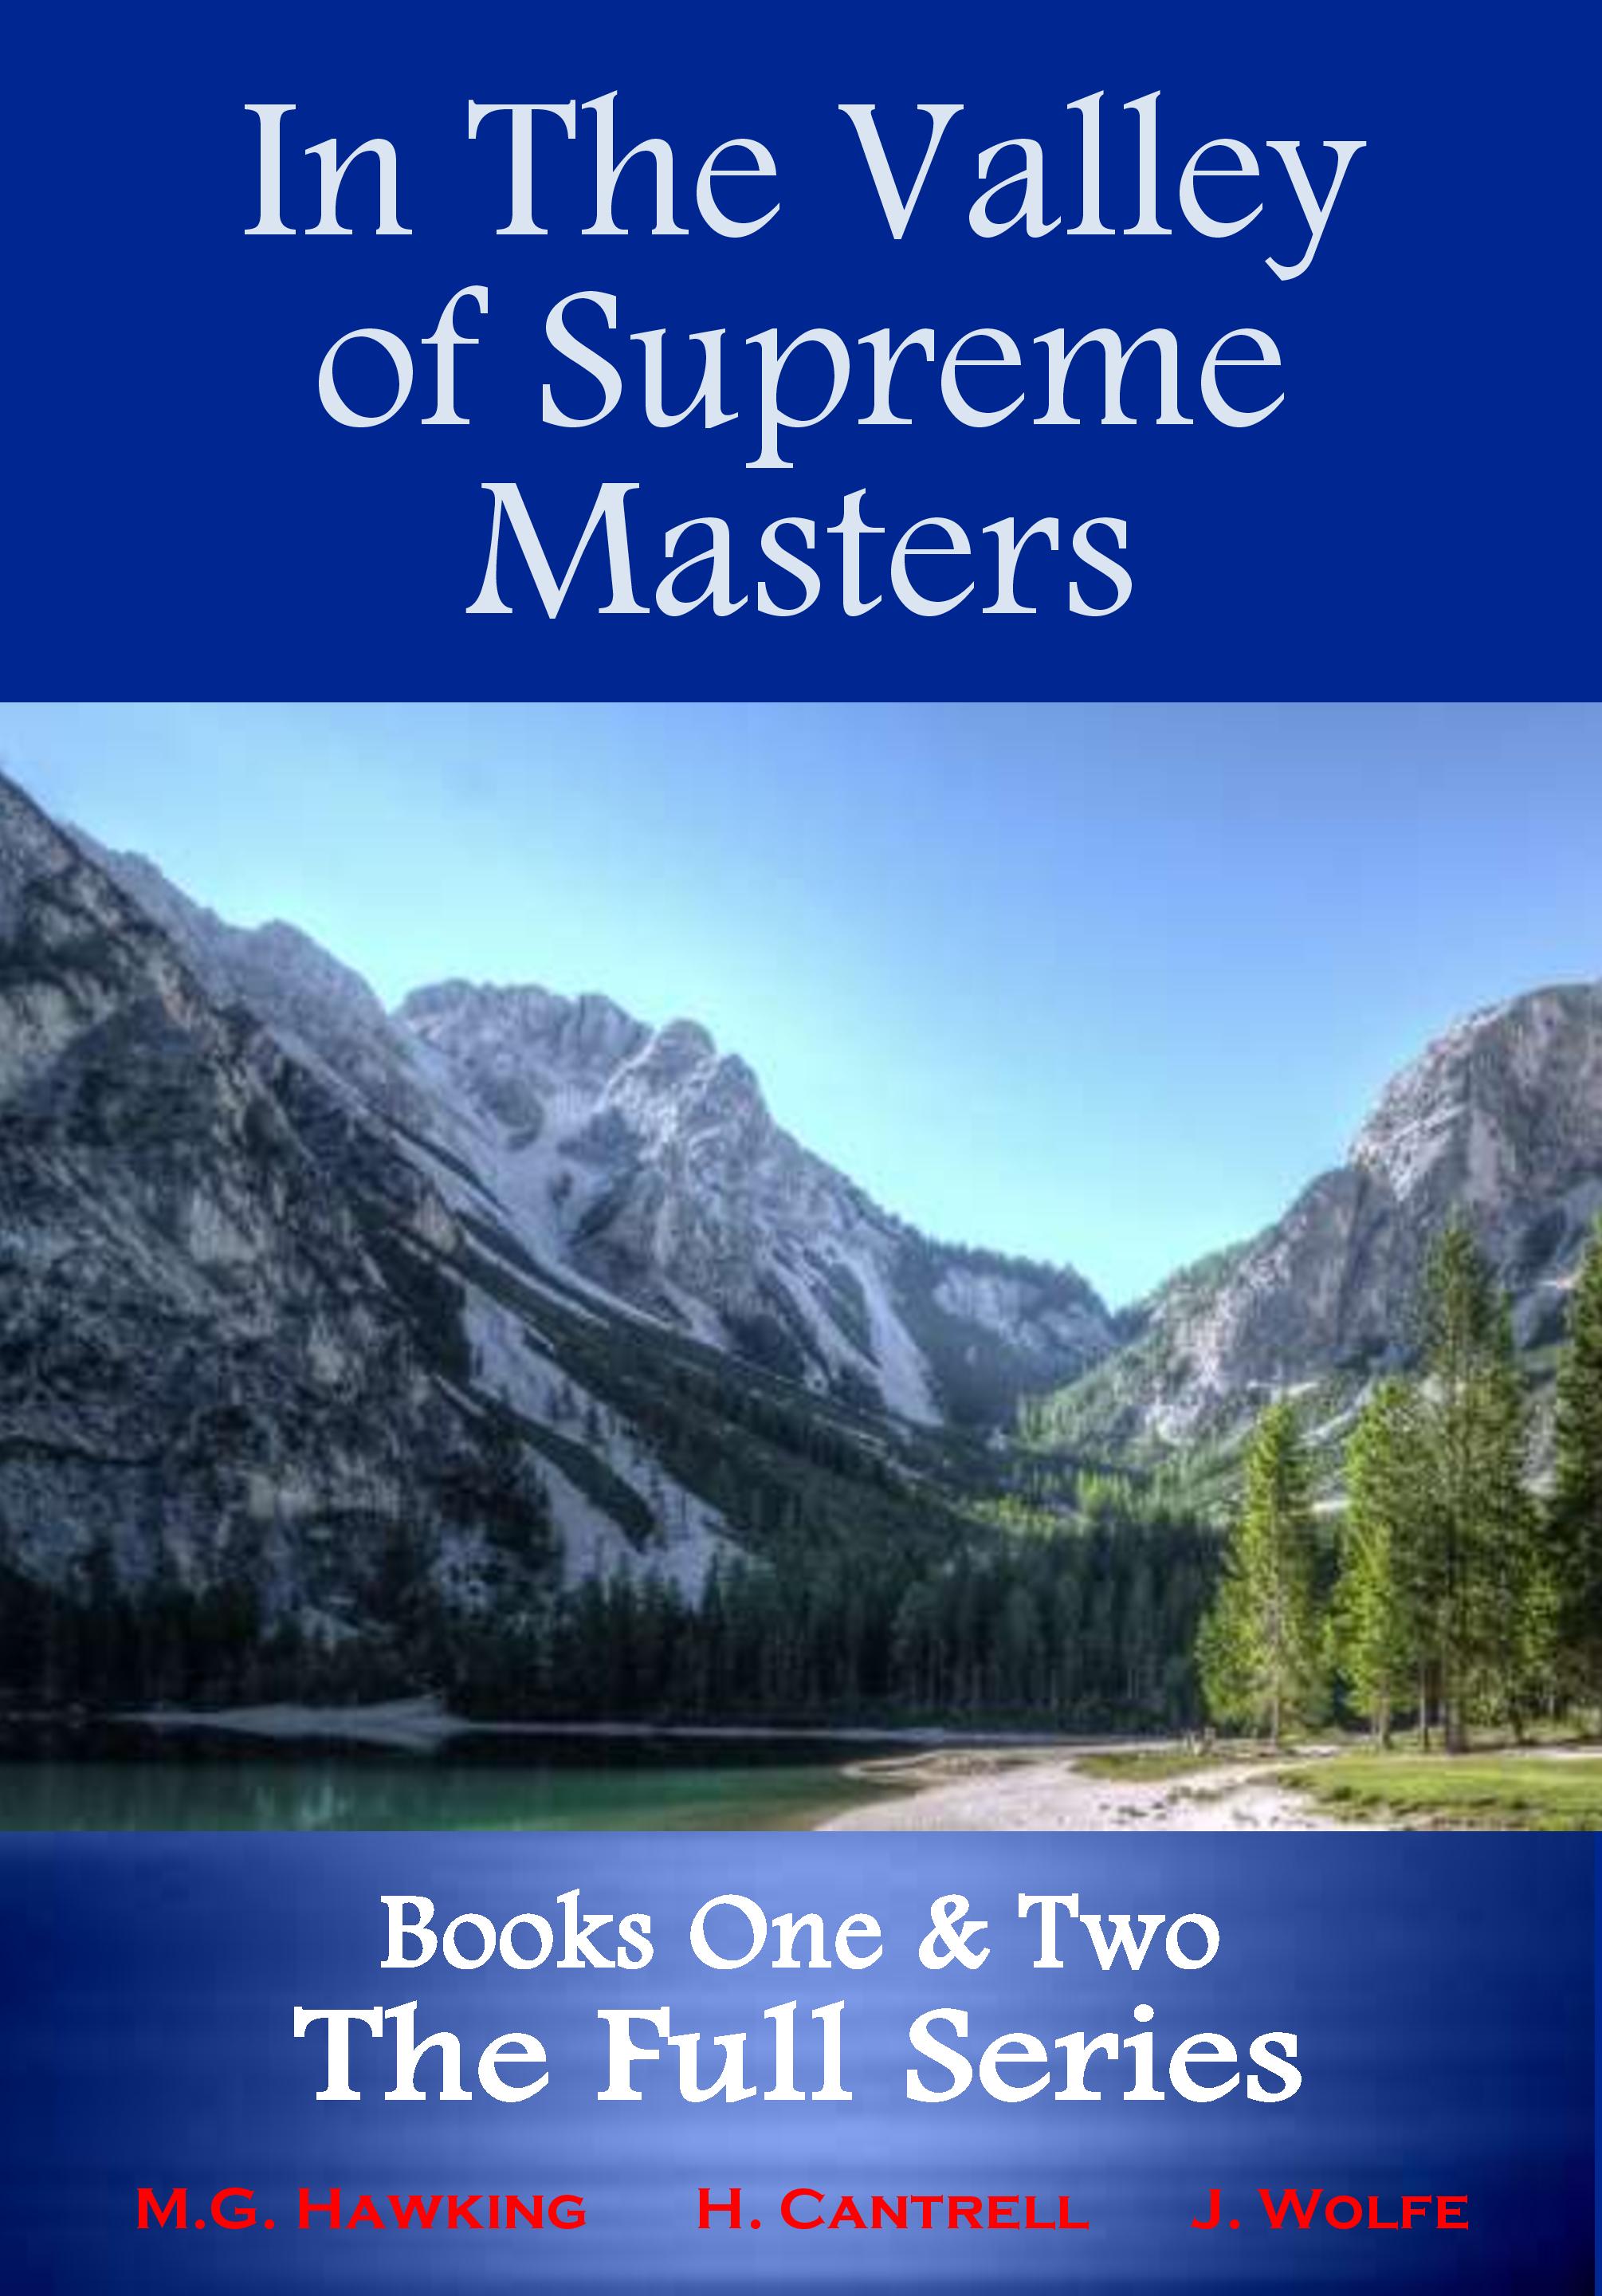 Valley of Supreme Masters book cover